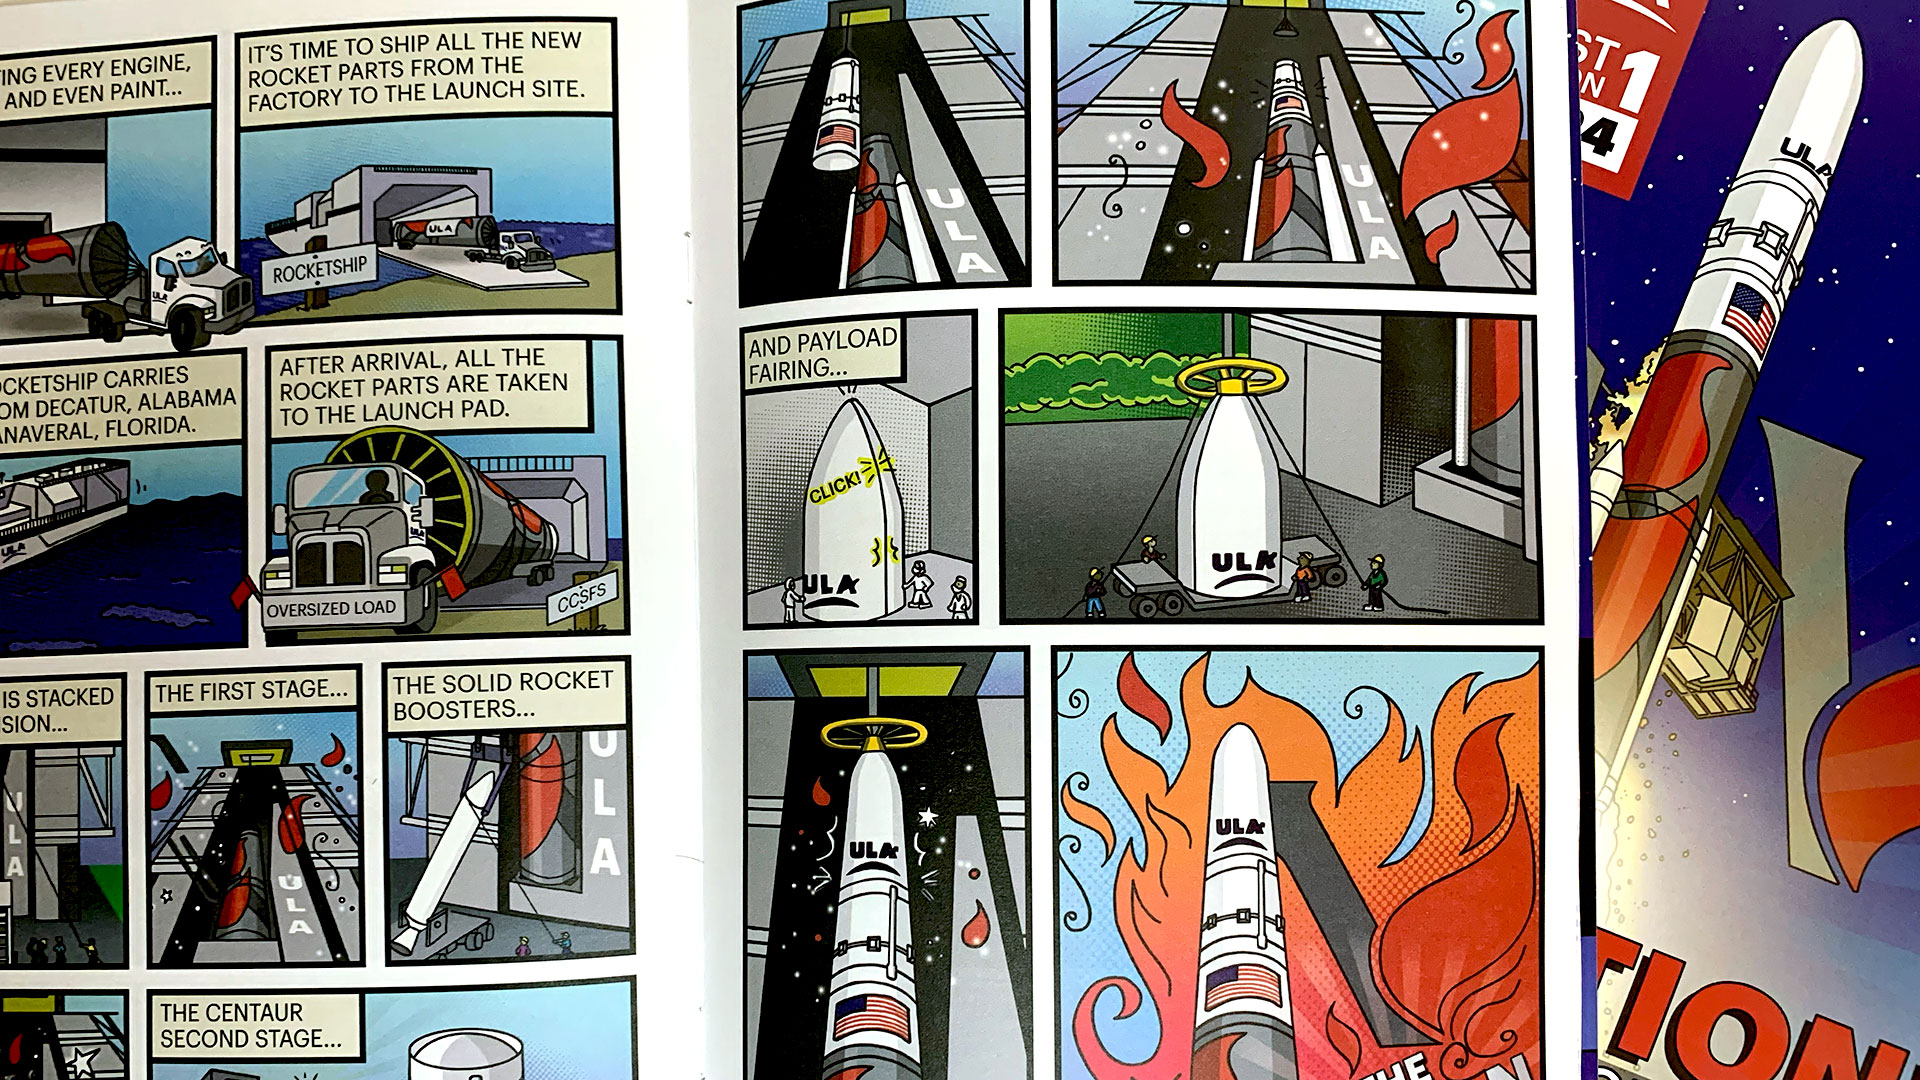 ULA chronicles the rise of Vulcan rocket in new employee-drawn comic book Space